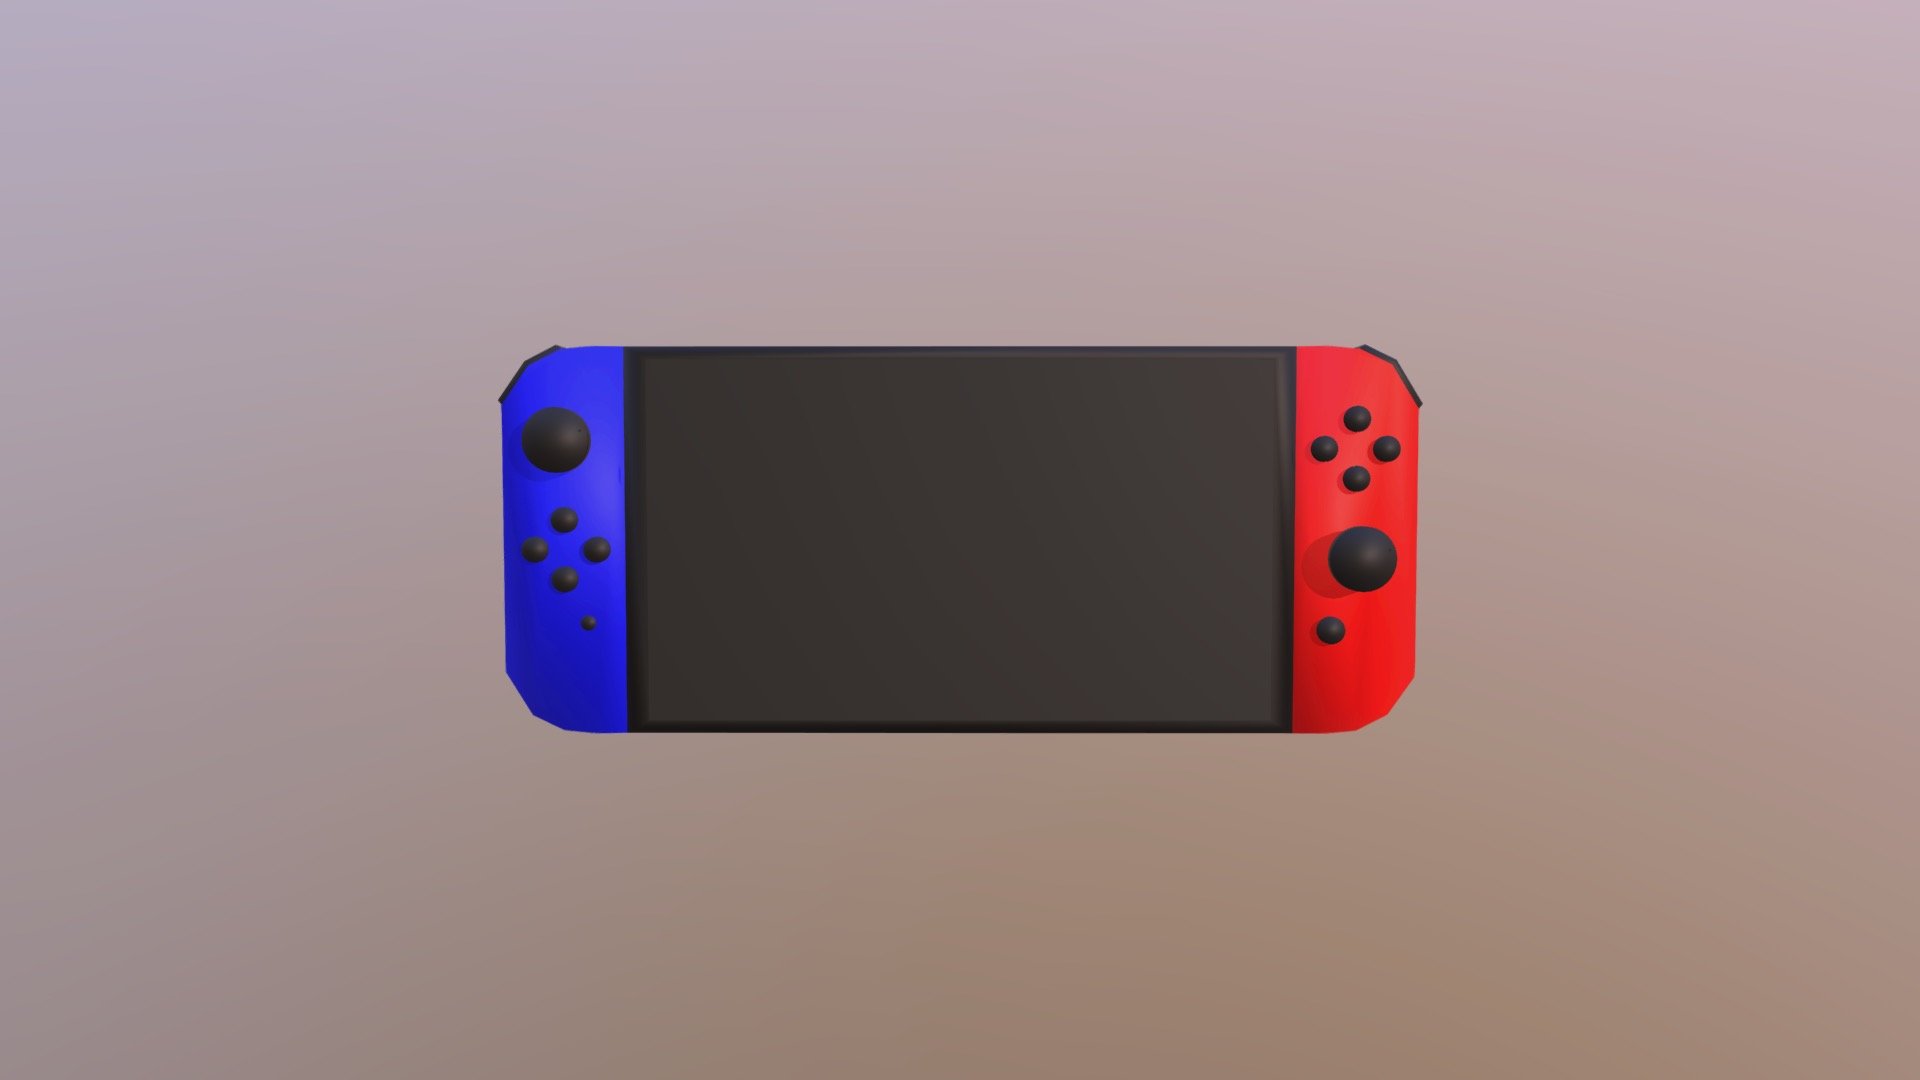 Nintendo Switch - 3D model by alexreed12345.